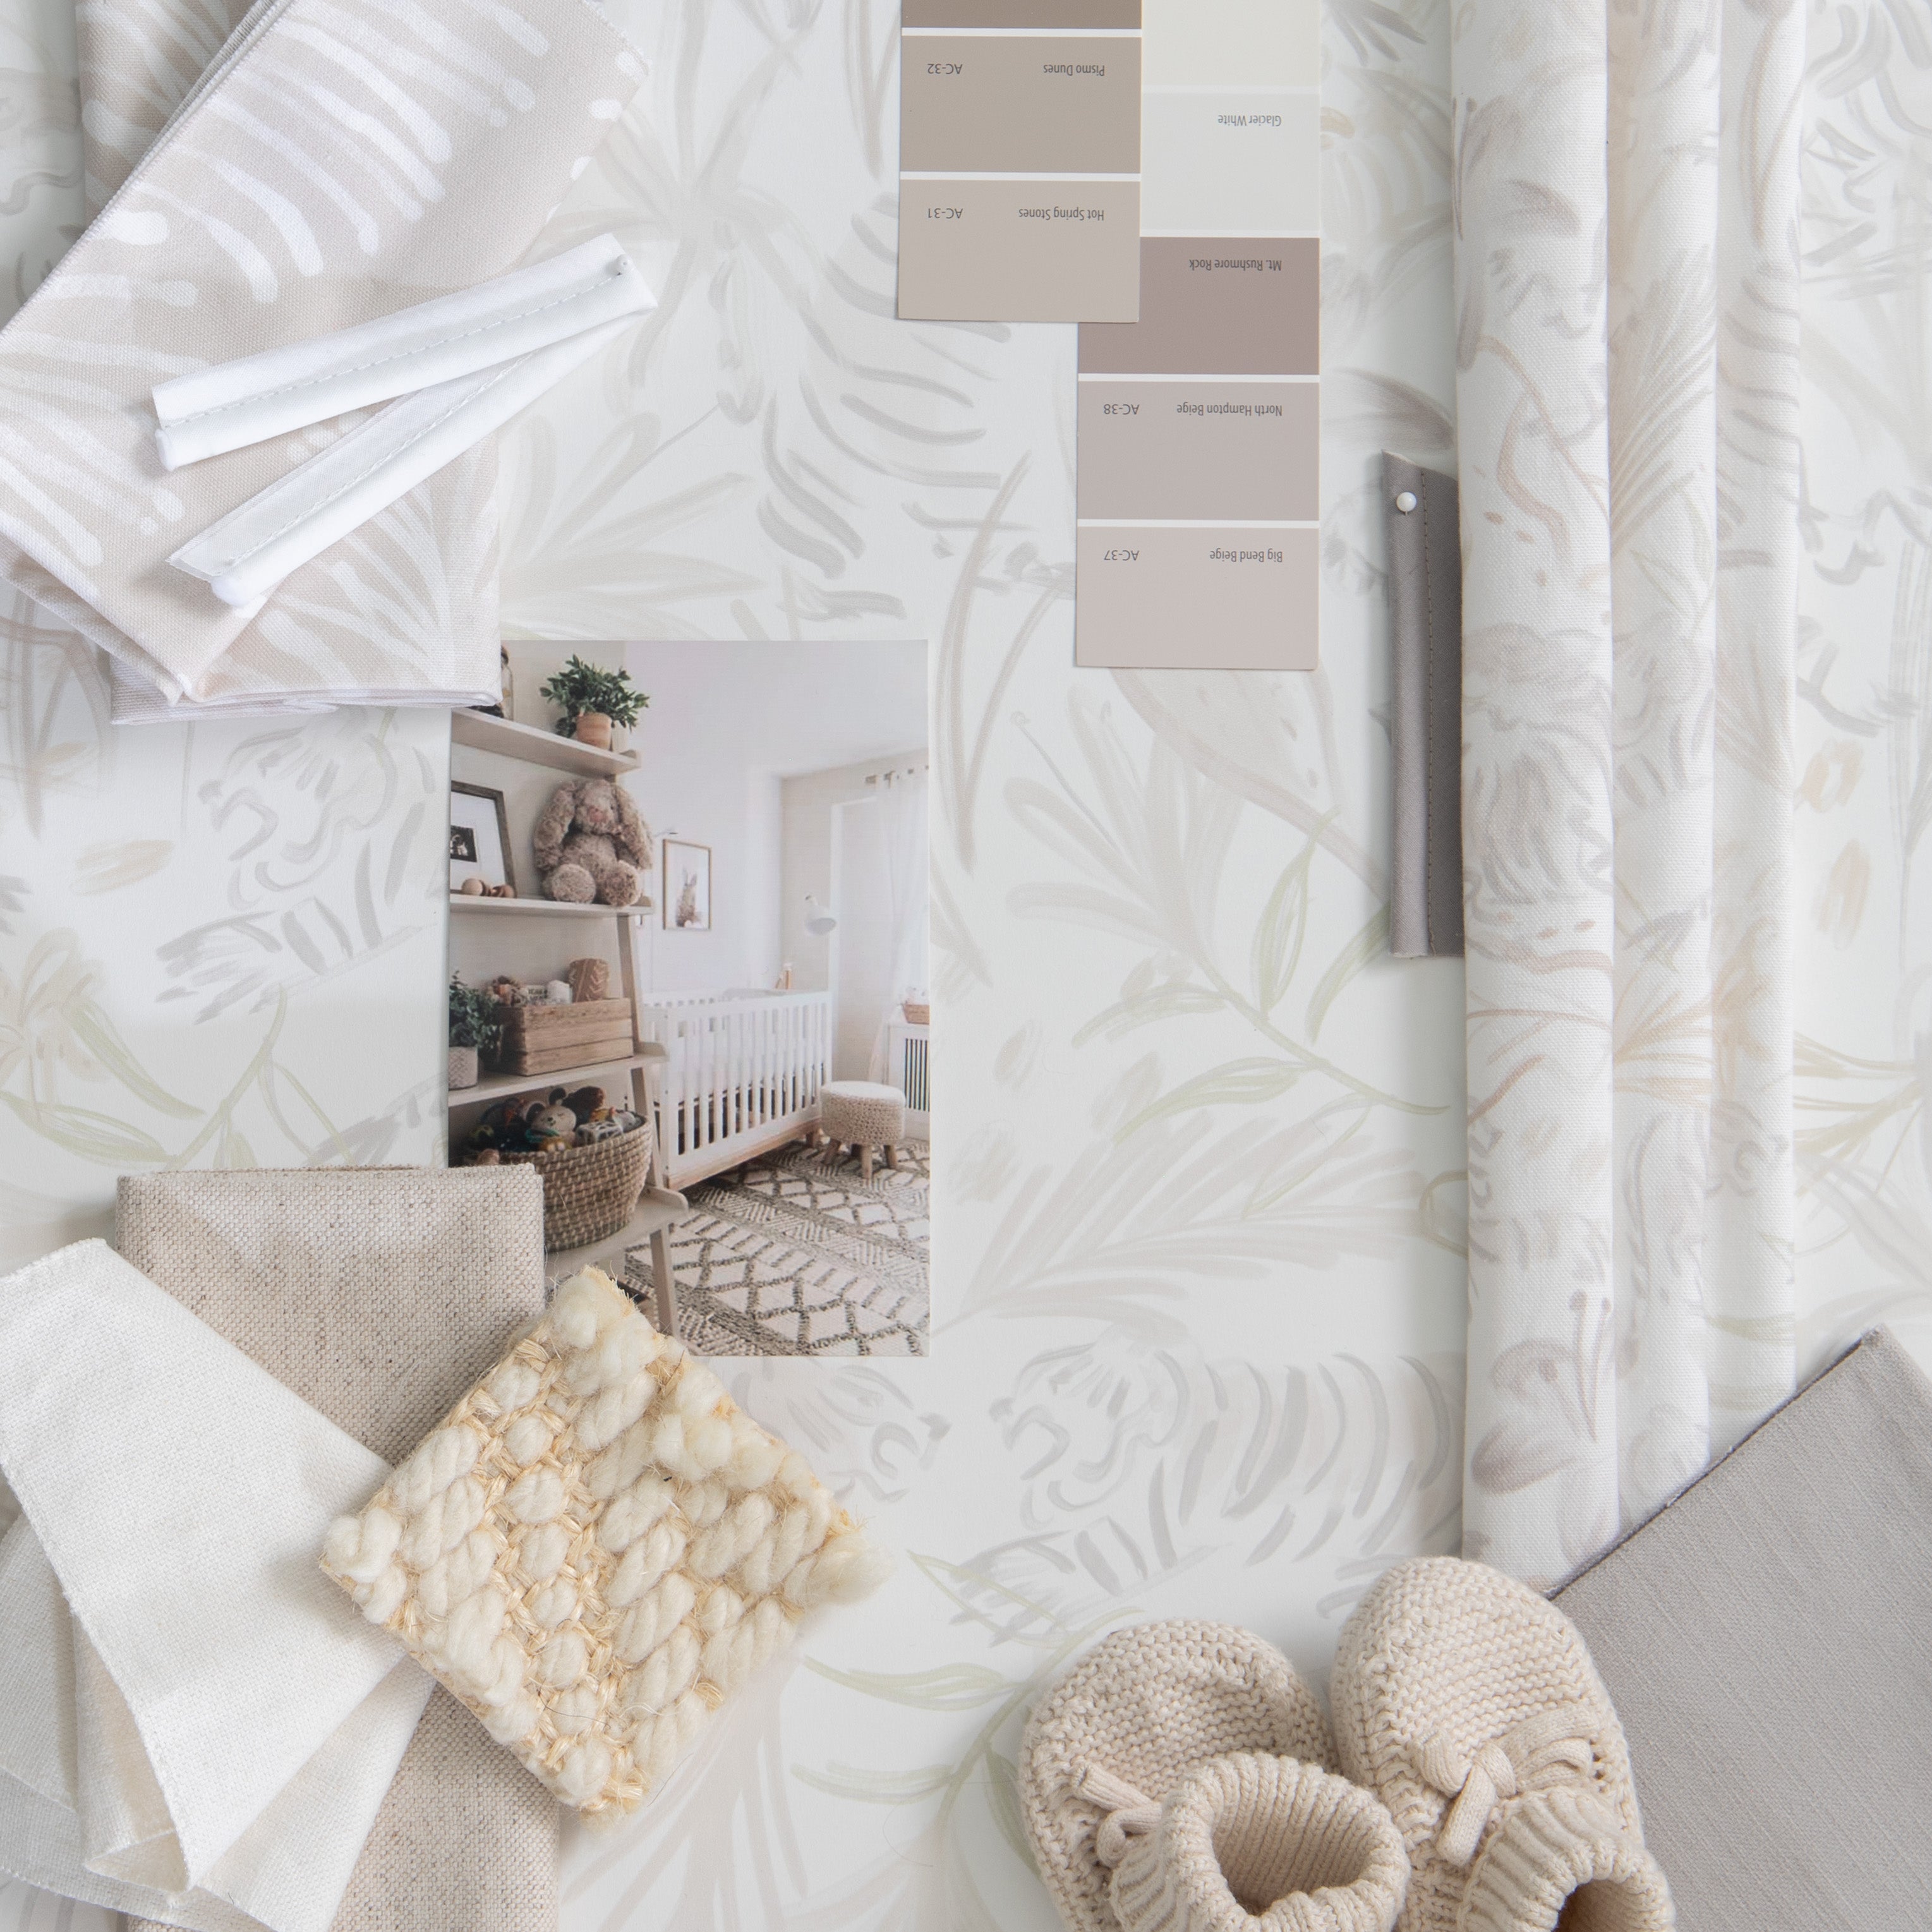 Interior design moodboard and fabric inspirations with Beige Botanical Stripe Printed Swatch and Beige Chinoiserie Tiger Printed Swatch